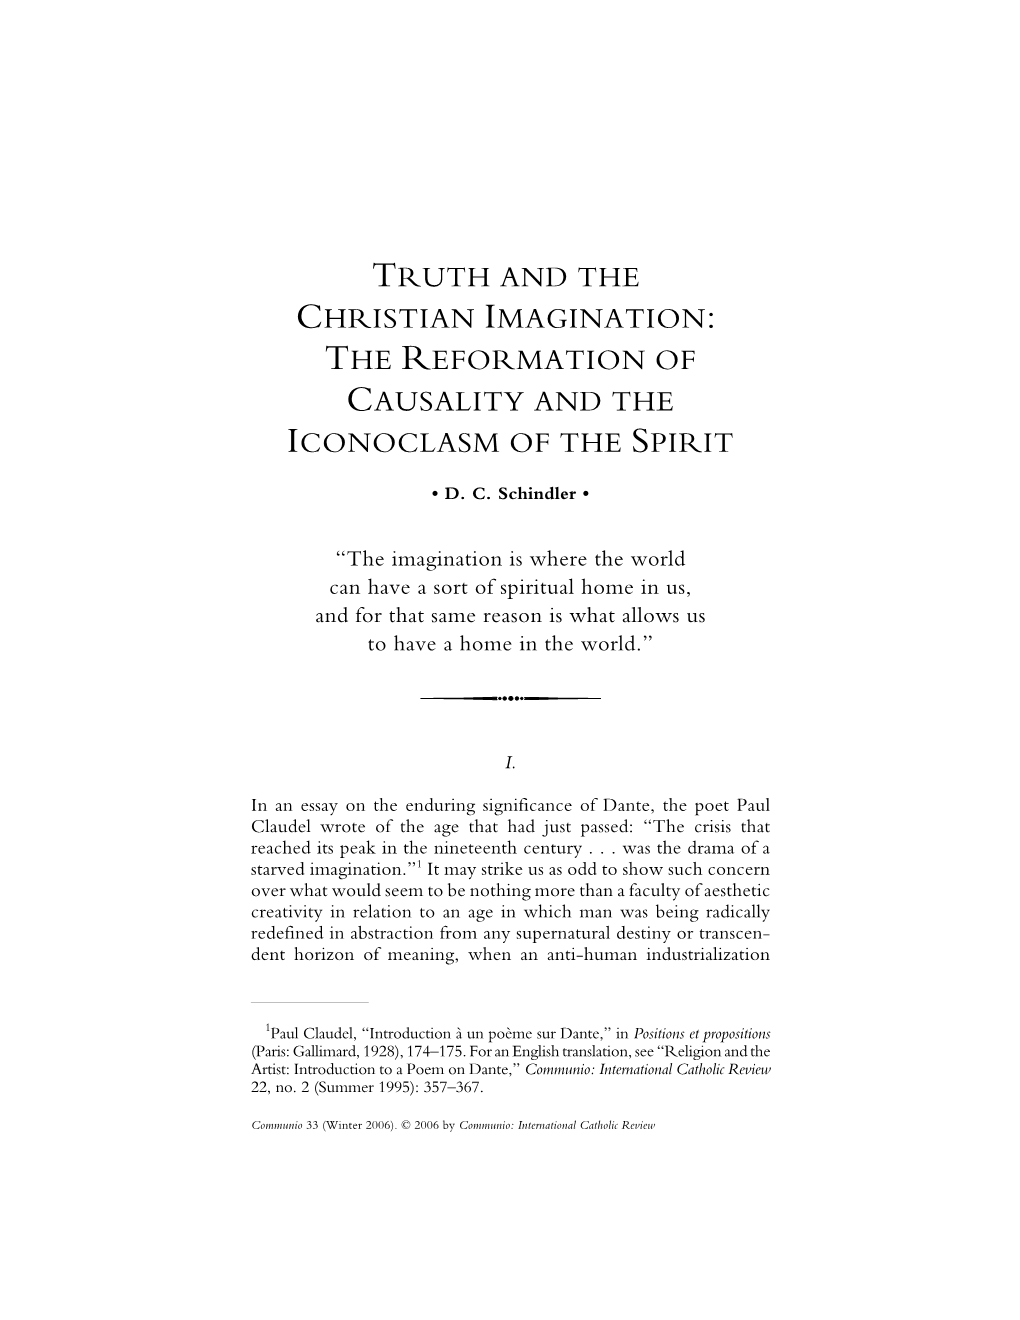 D. C. Schindler. Truth and the Christian Imagination: the Reformation of Causality and the Iconoclasm of the Spirit. Communio 33